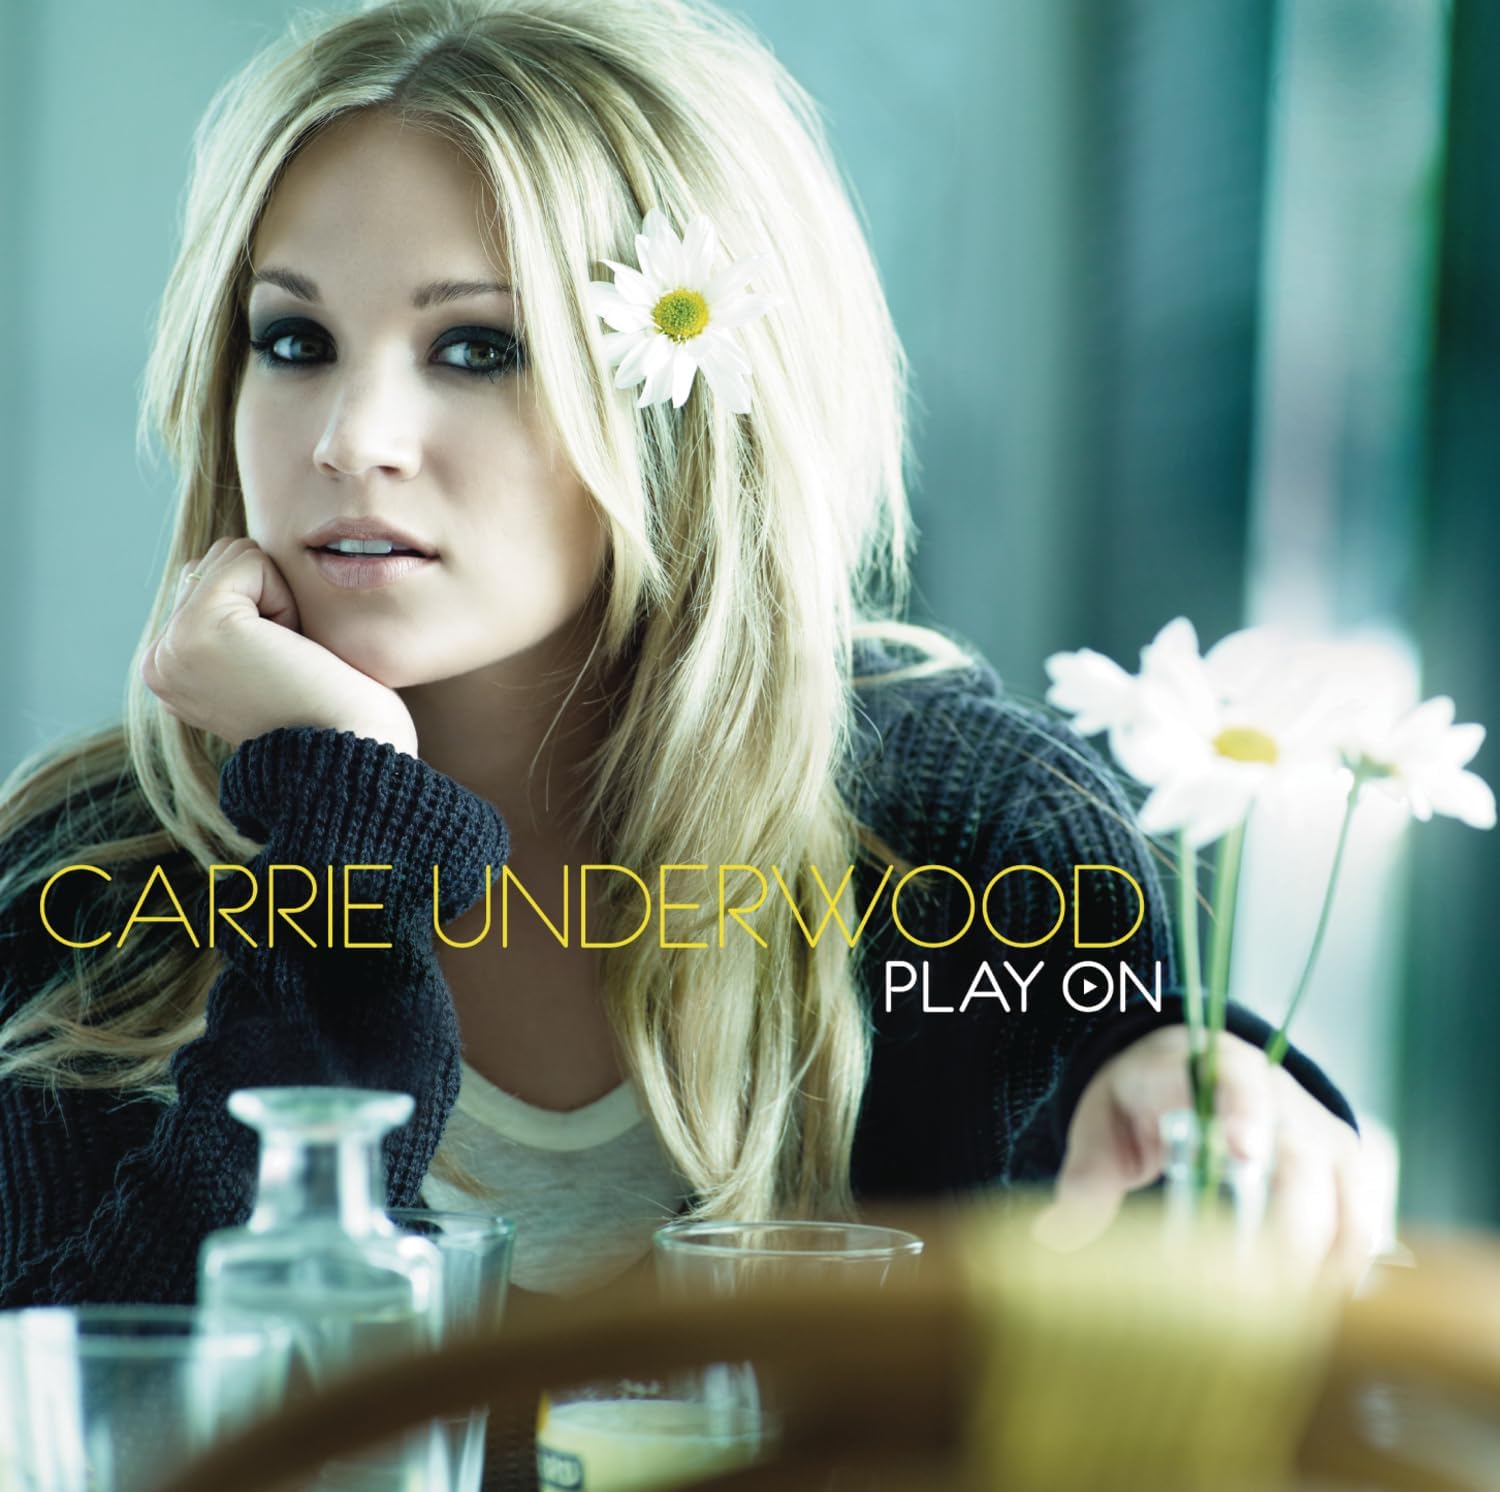 Carrie Underwood Play On (2009, CD)